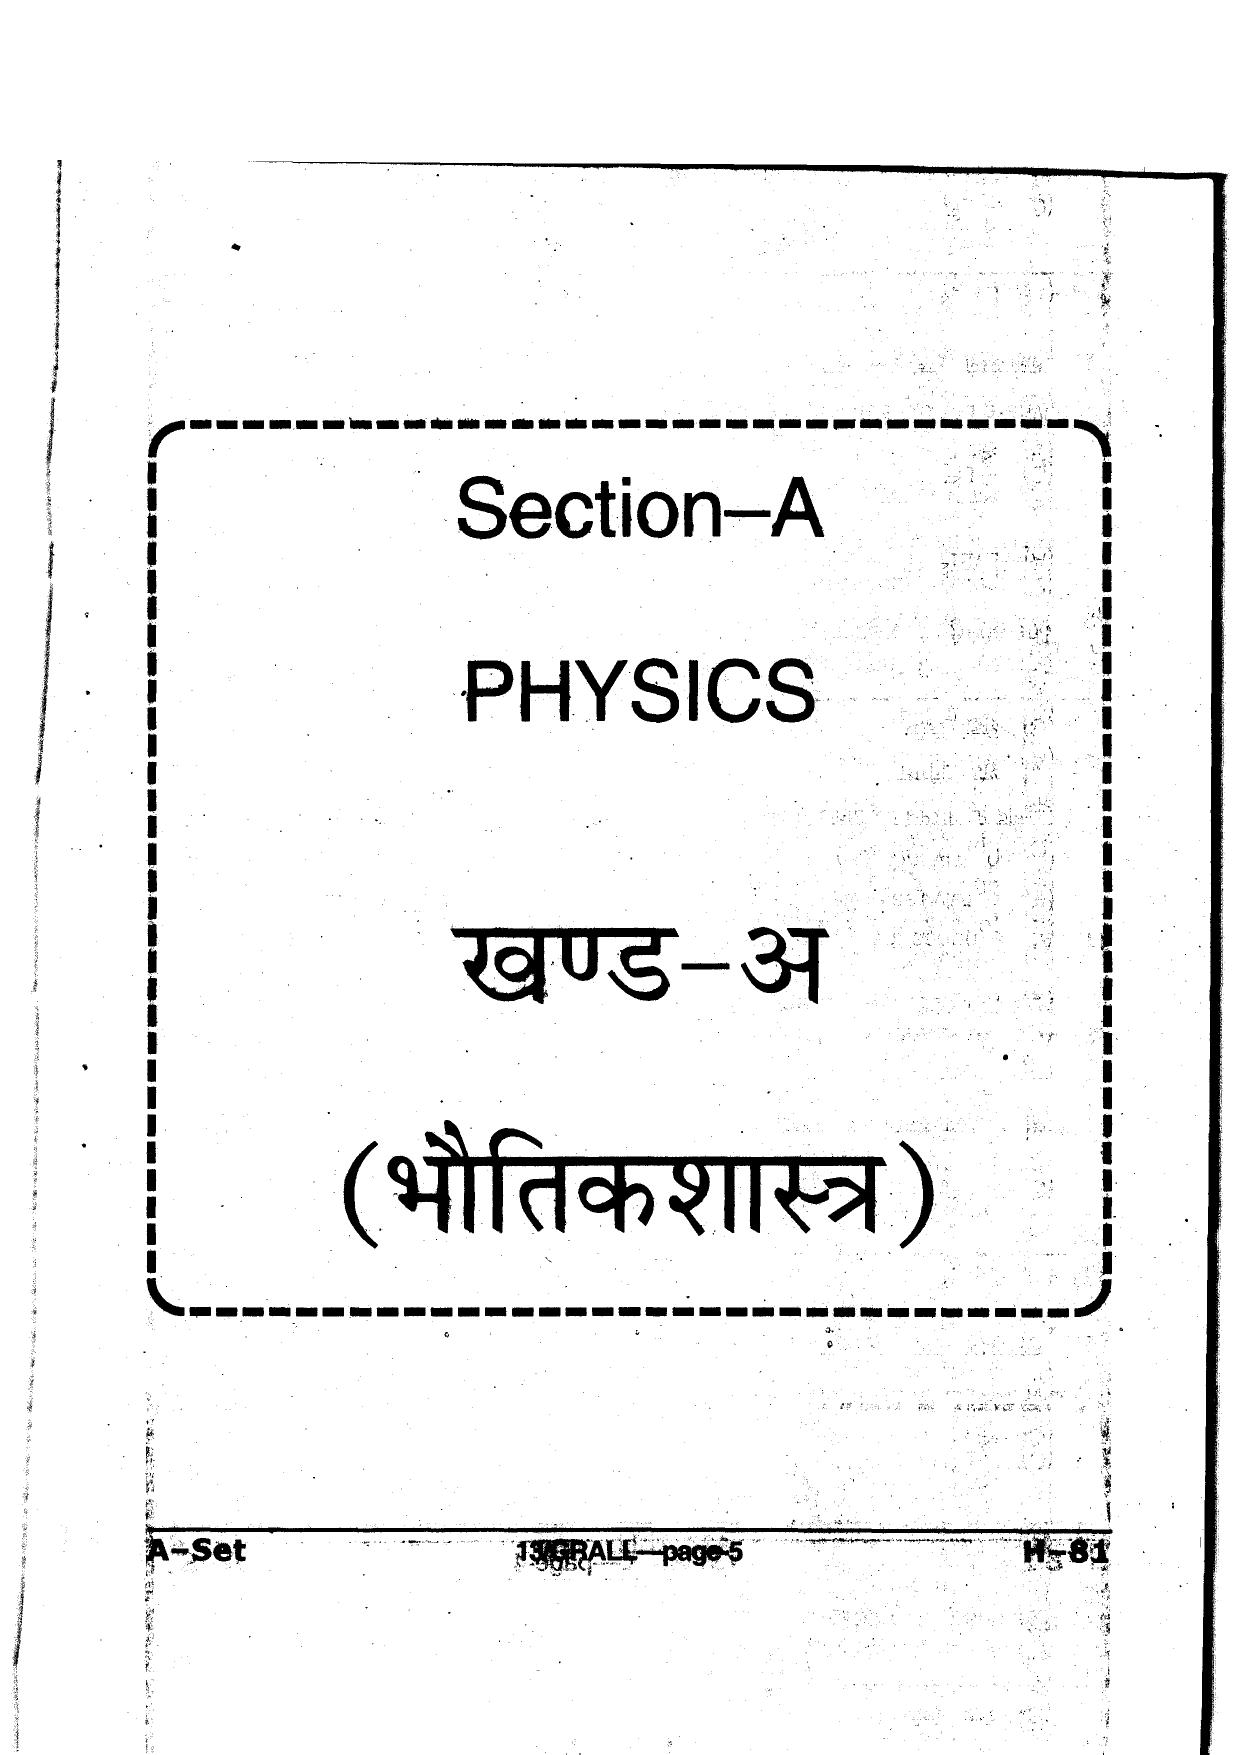 MP PAT 2013 Question Paper - Paper I - Page 5